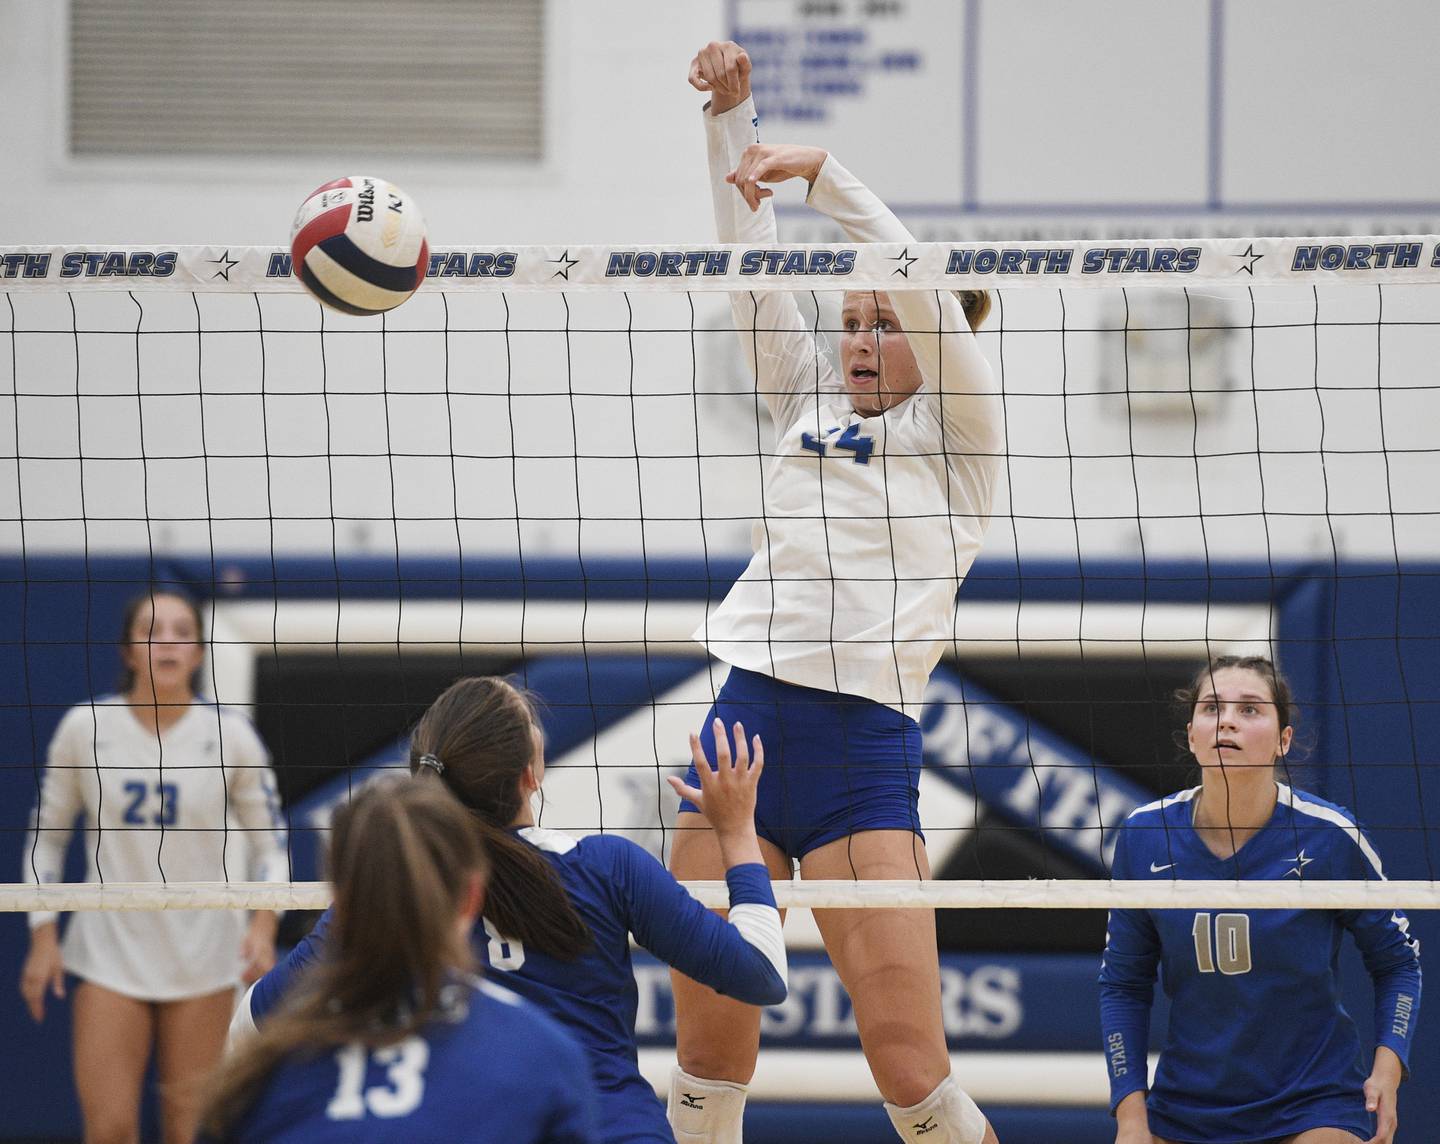 John Starks/jstarks@dailyherald.com
St. Charles North’s Katherine Scherer blocks a shot toward Rosary’s Sarah Schmidt in a girls volleyball game in St. Charles on Monday, August 22, 2022.